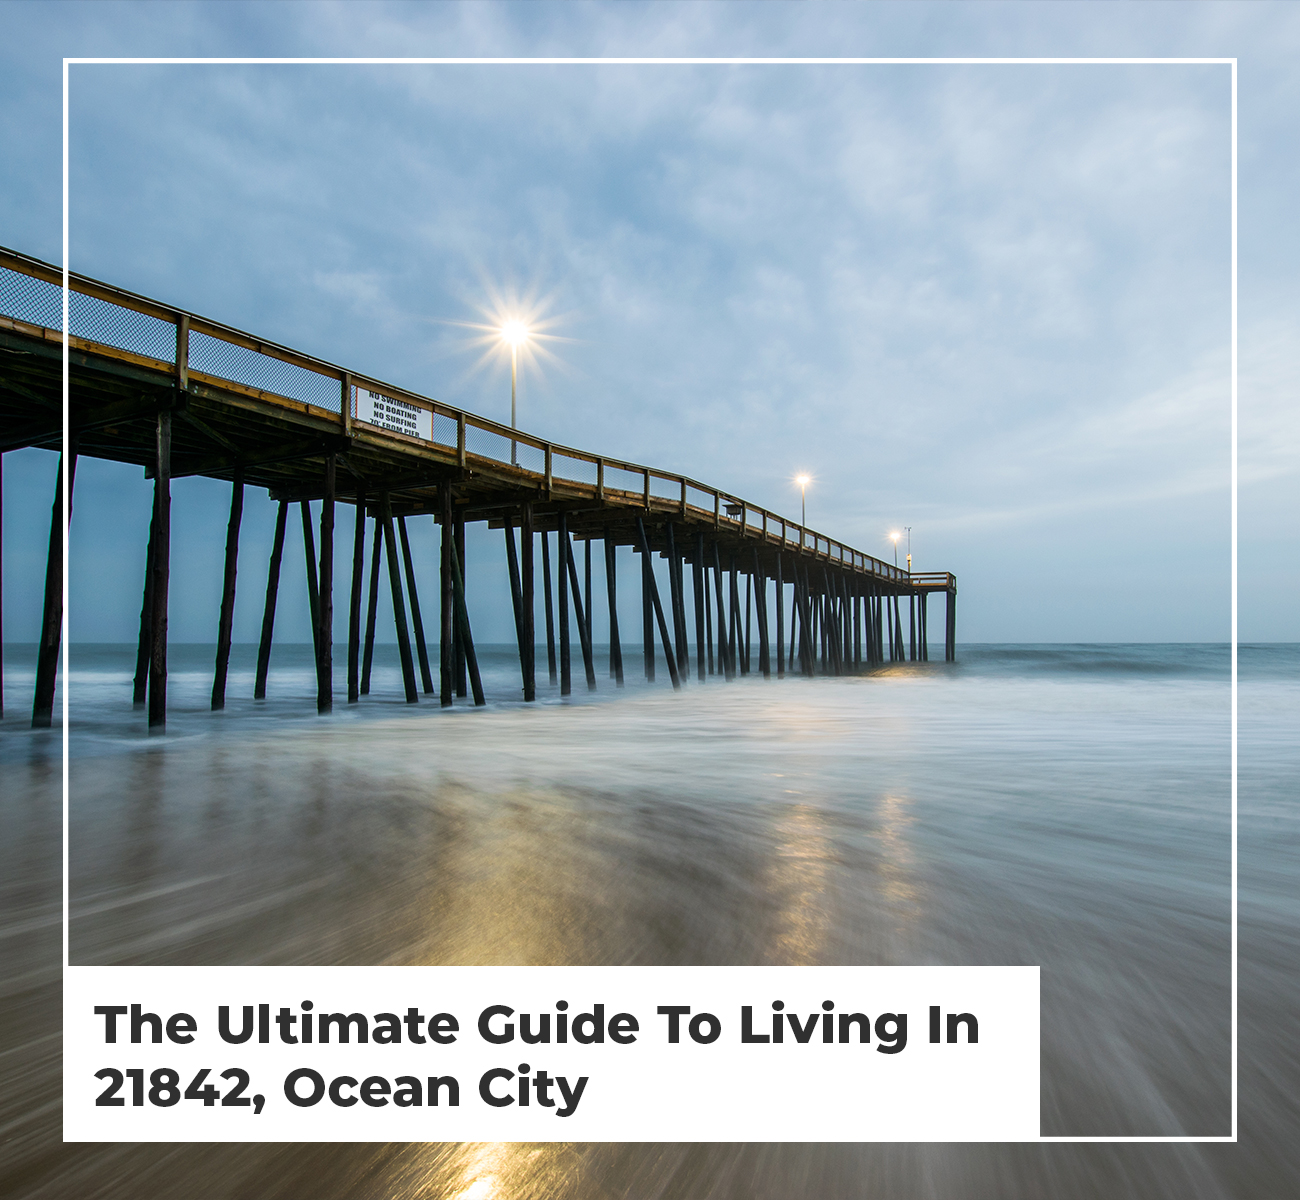 Ocean City Nj Hotels on Boardwalk  : The Ultimate Guide to Oceanfront Accommodations